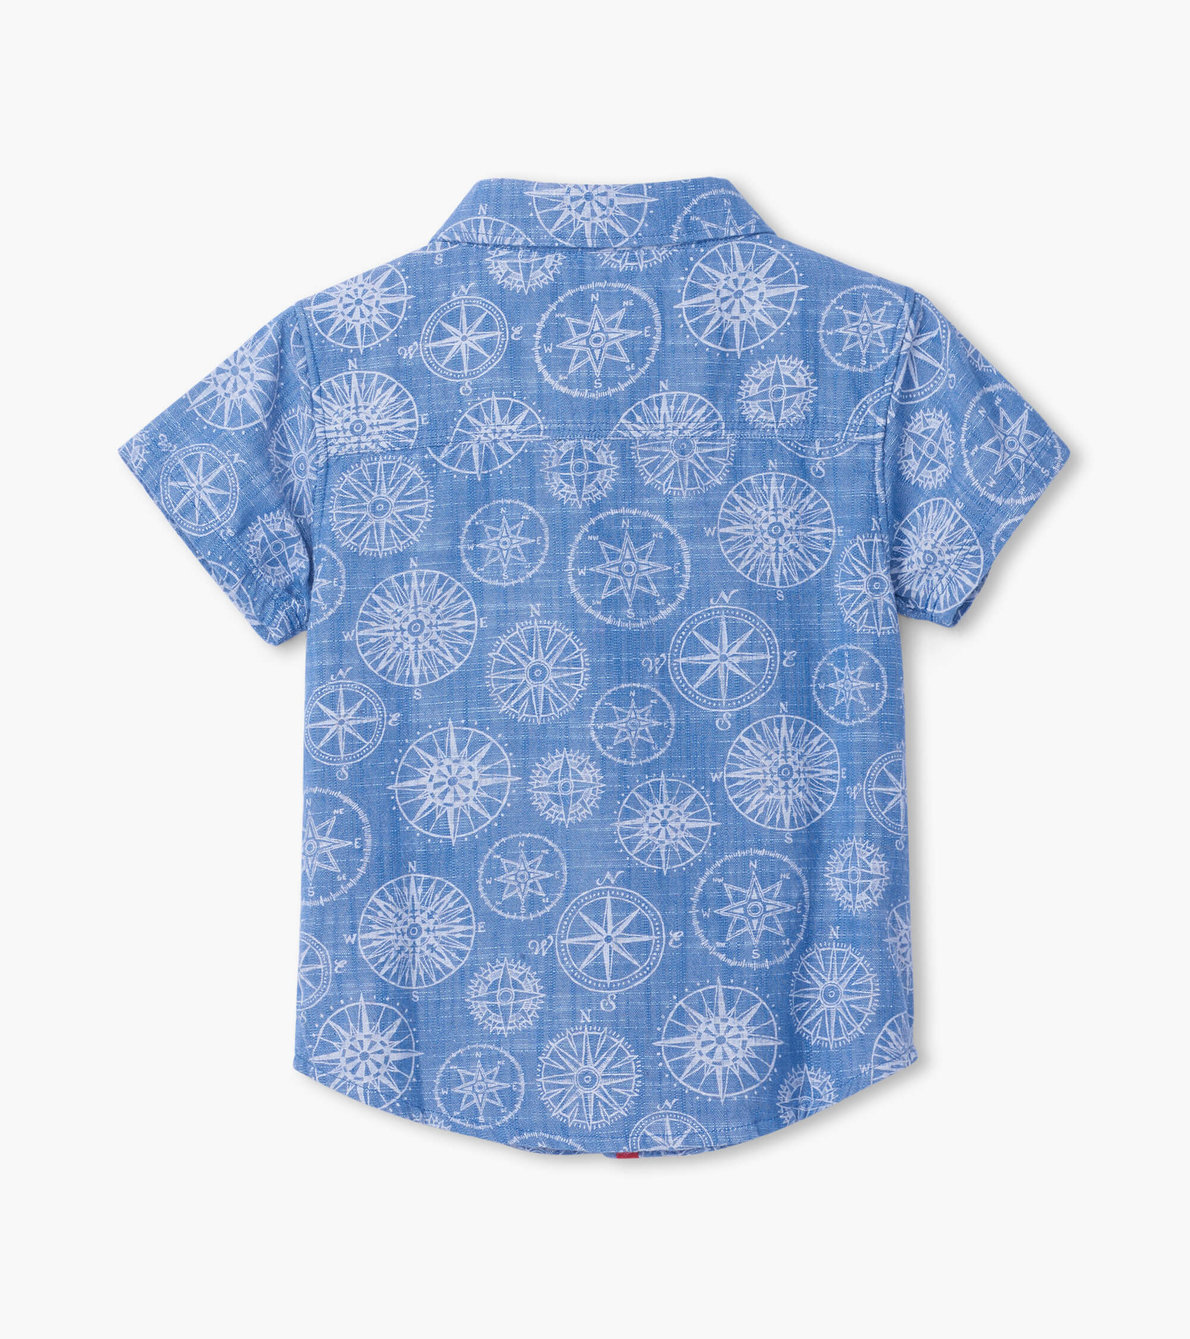 View larger image of Nautical Compass Baby Button Down Shirt